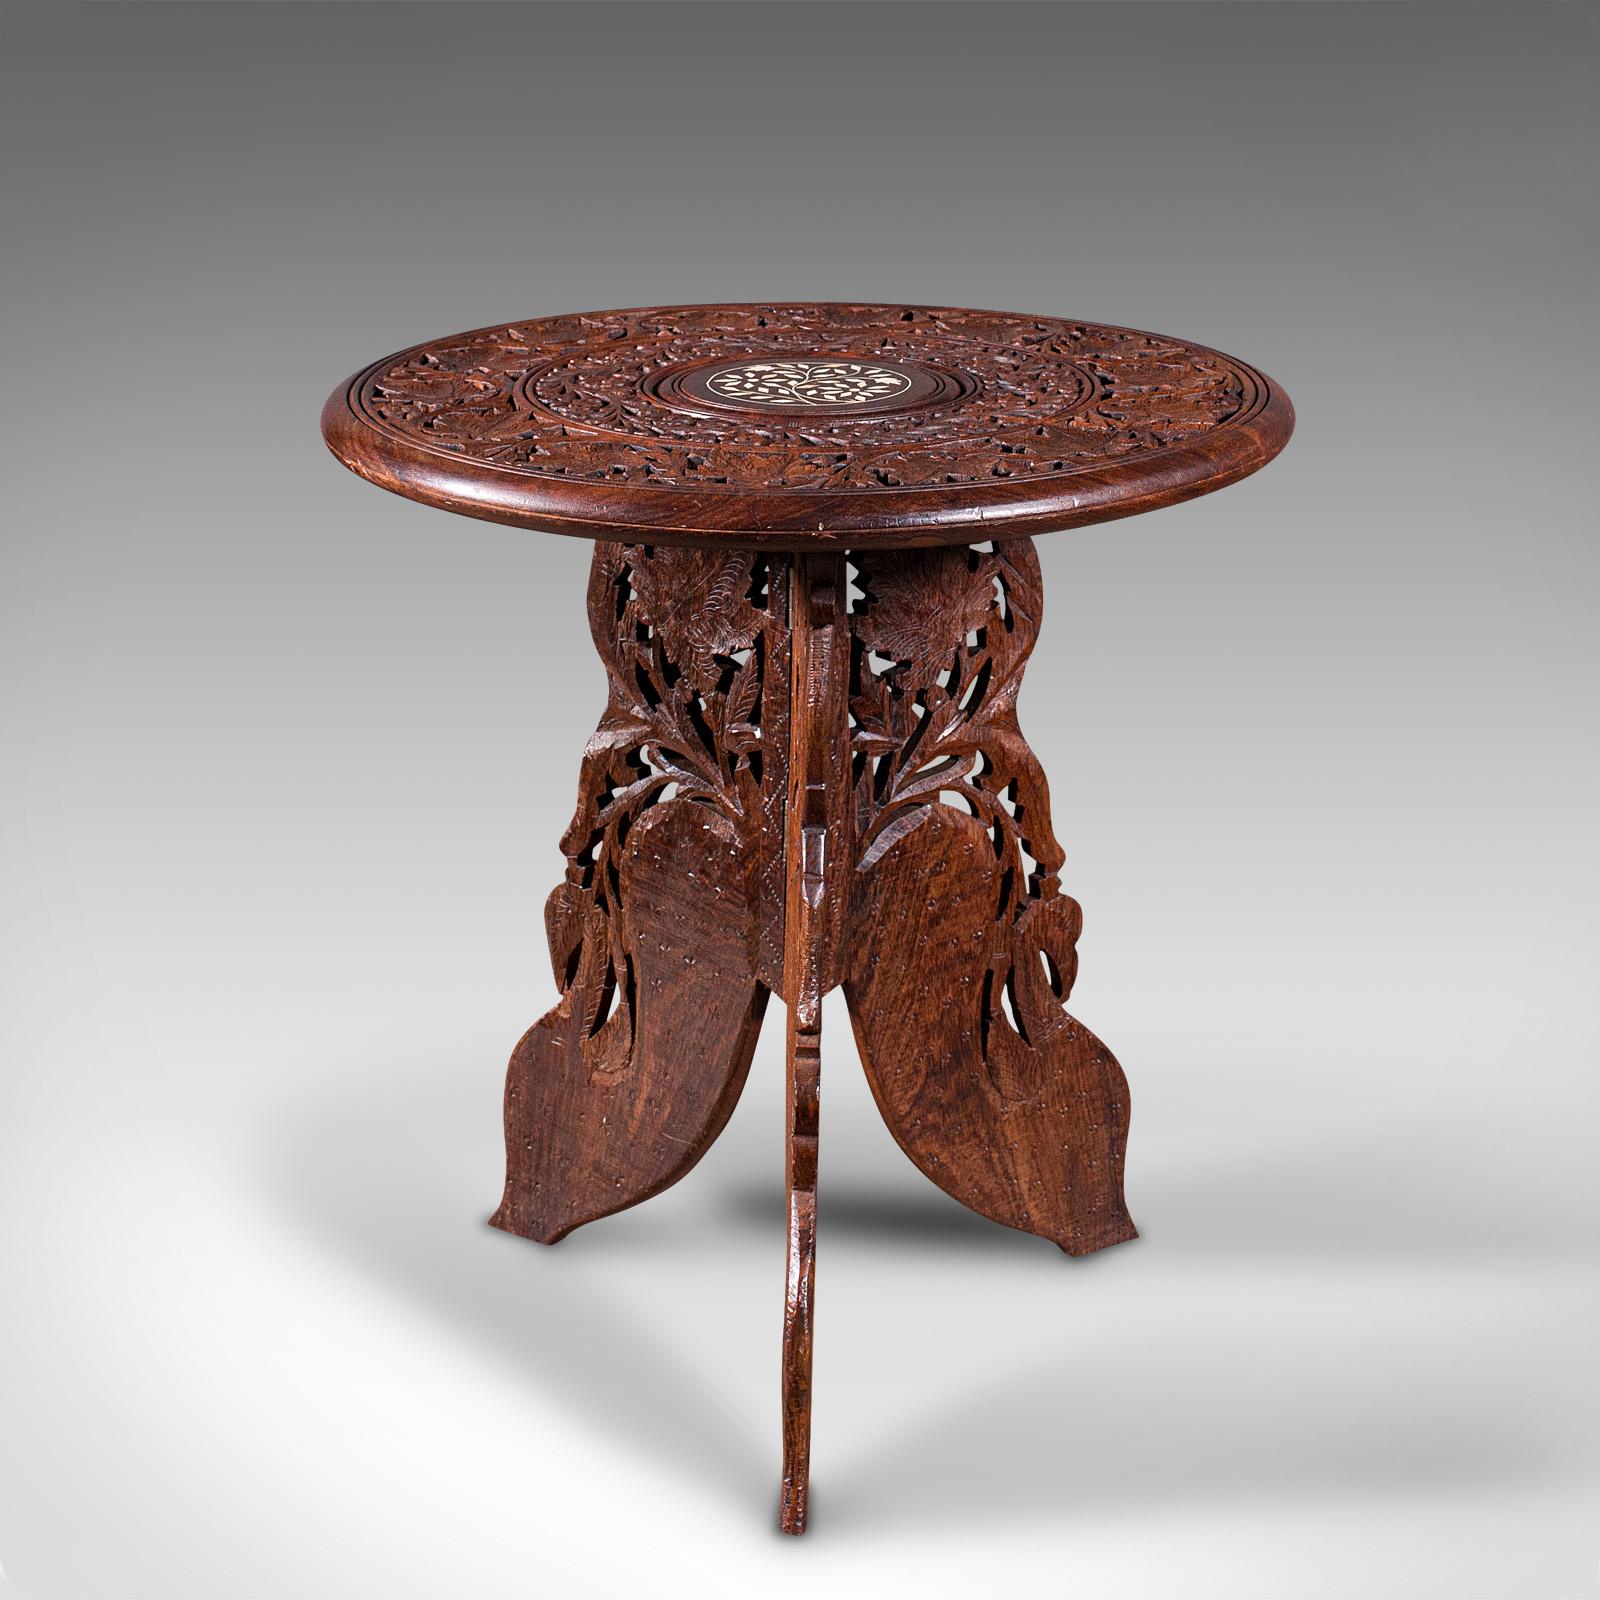 This is an antique circular side table. An Anglo-Indian, Chinese rosewood fold away lamp or wine table with Moorish taste, dating to the early 20th century, circa 1920.

Exotic taste with fascinating detail and finish
Displays a desirable aged